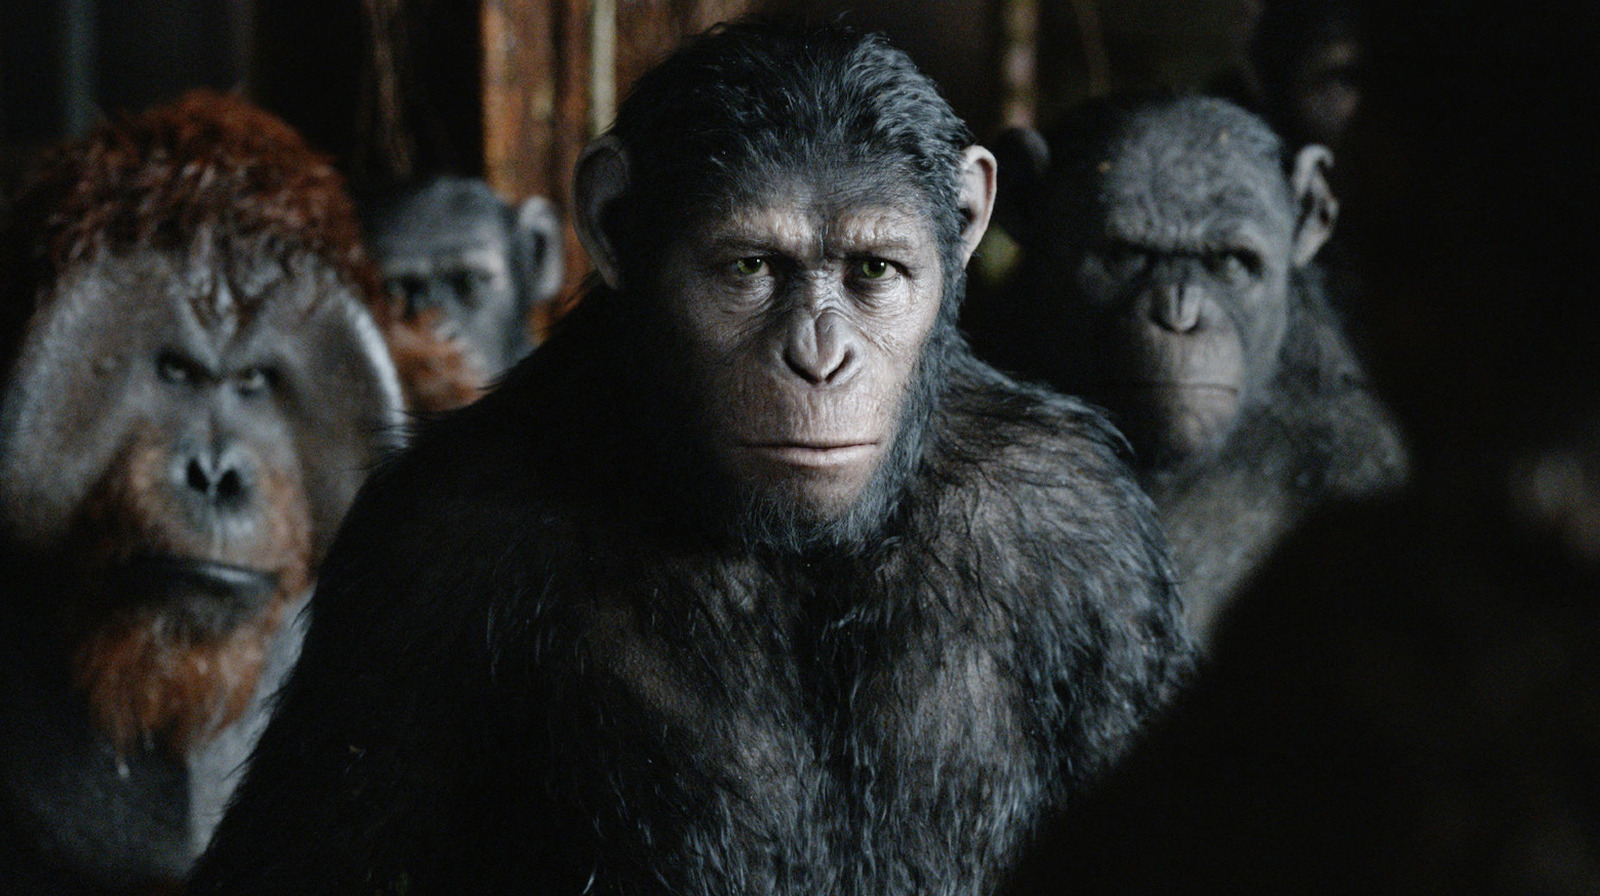 Matt Reeves' Planet Of The Apes Movies Found A Loophole In The Studio System